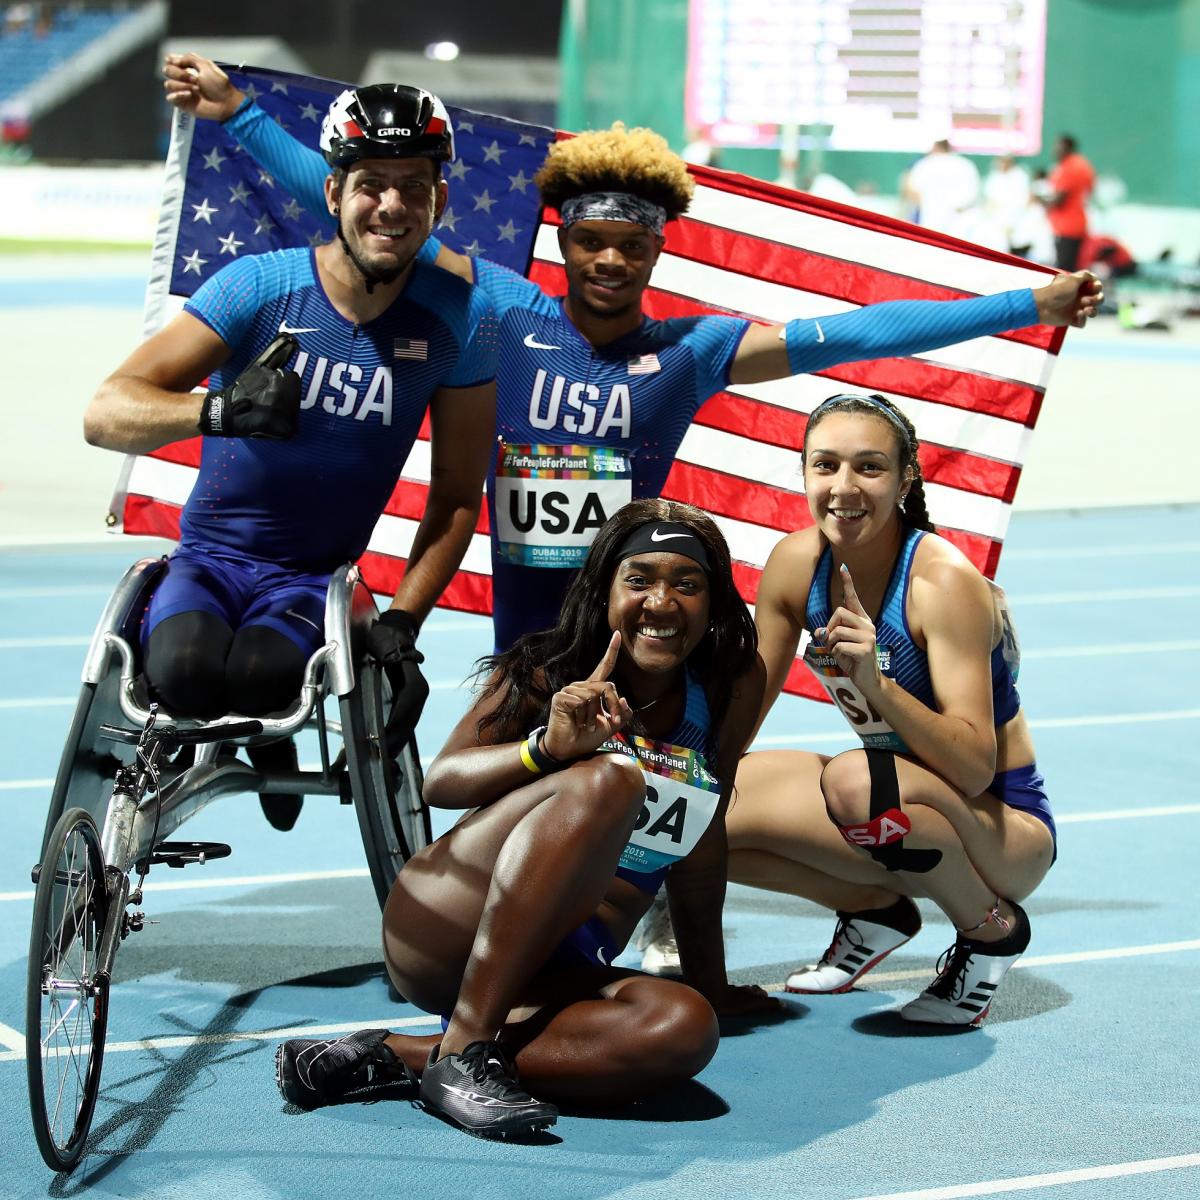 NBCUniversal announces unprecedented Tokyo 2020 Paralympic coverage in USA